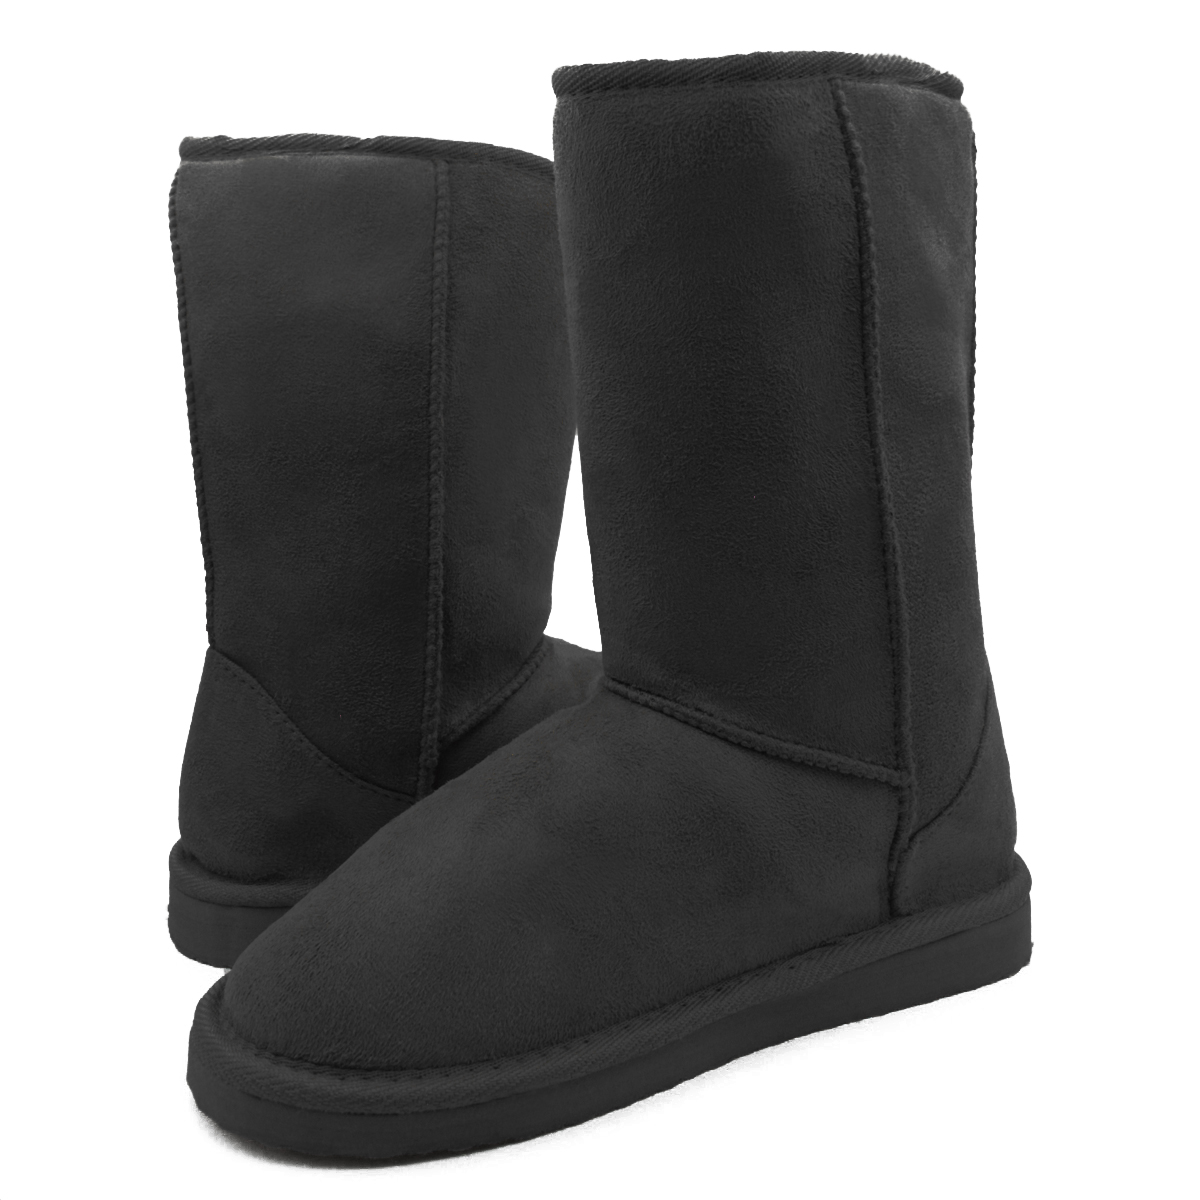 Womens Fur Boots Faux Sheepskin Suede Mid Calf Tall Classic Shoes ...